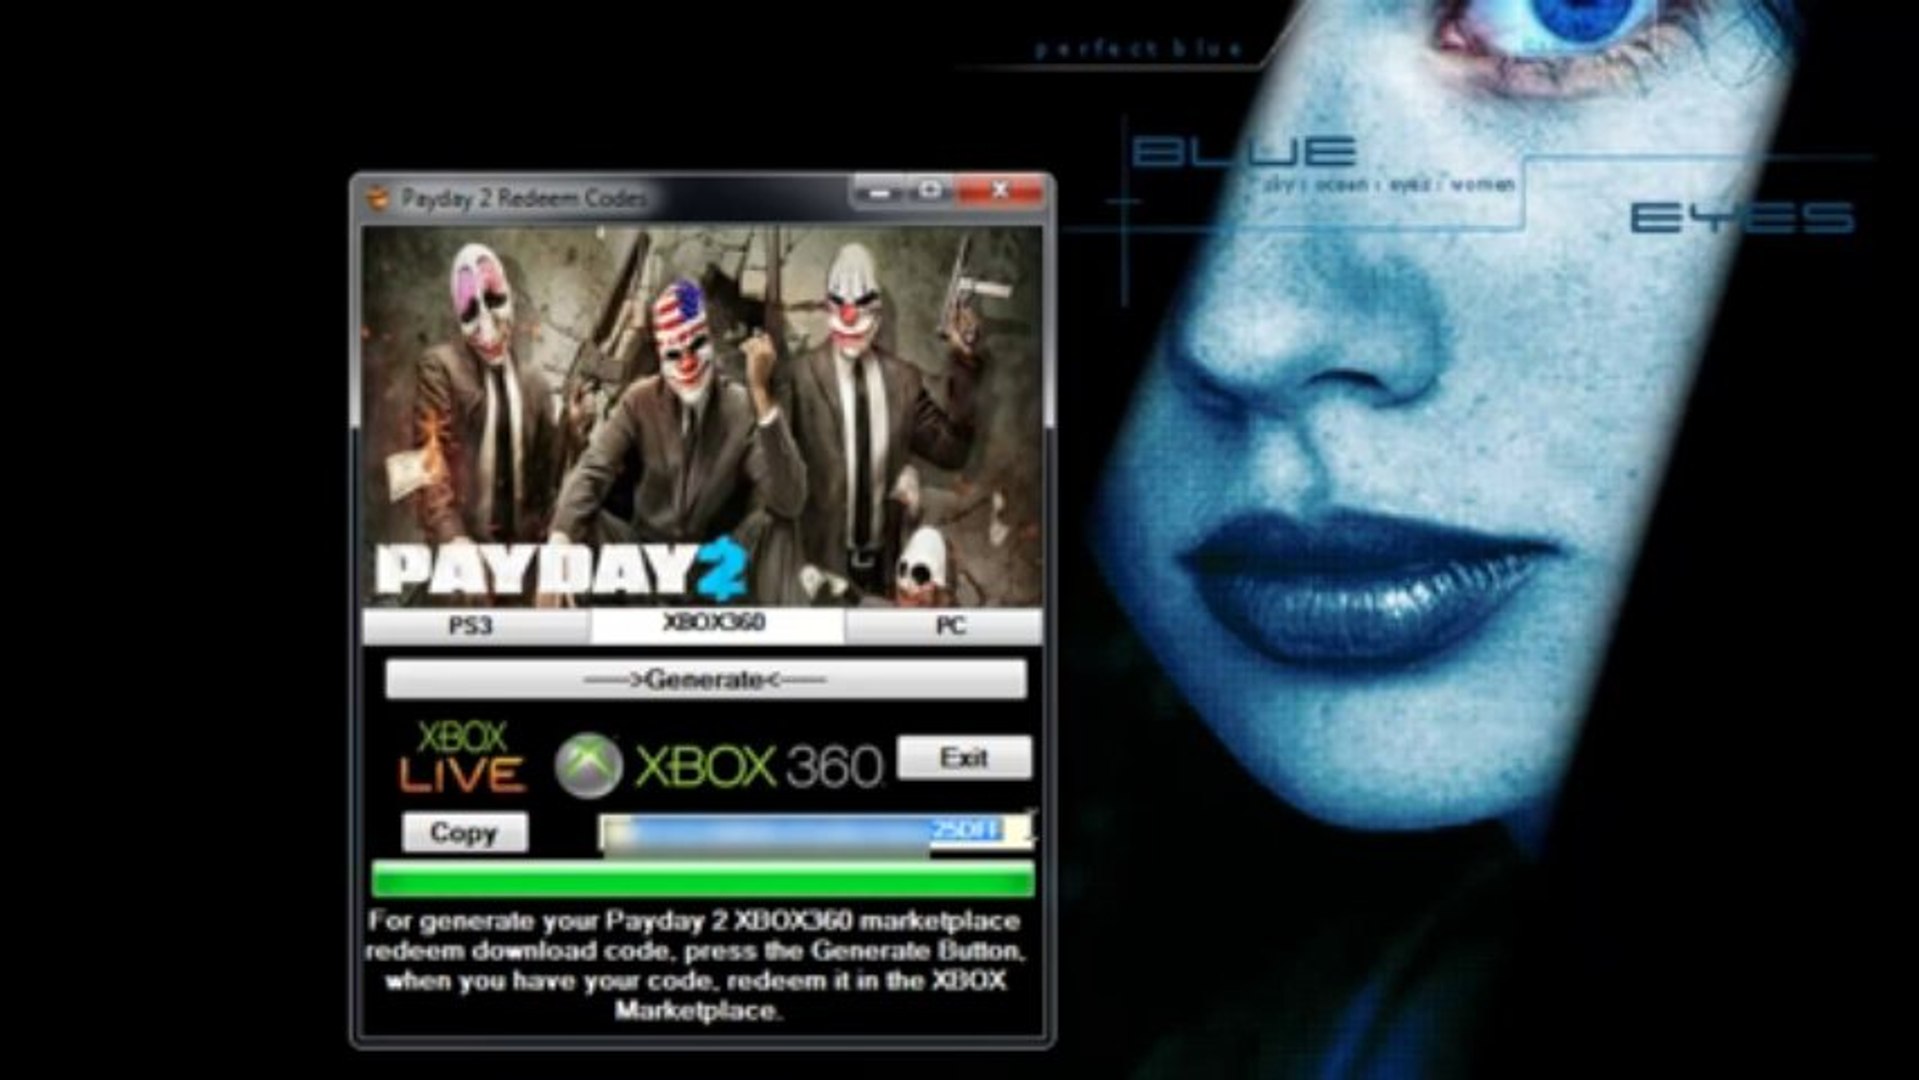 Payday 2 free download link + crack PC PS3 XBOX 360 - video Dailymotion